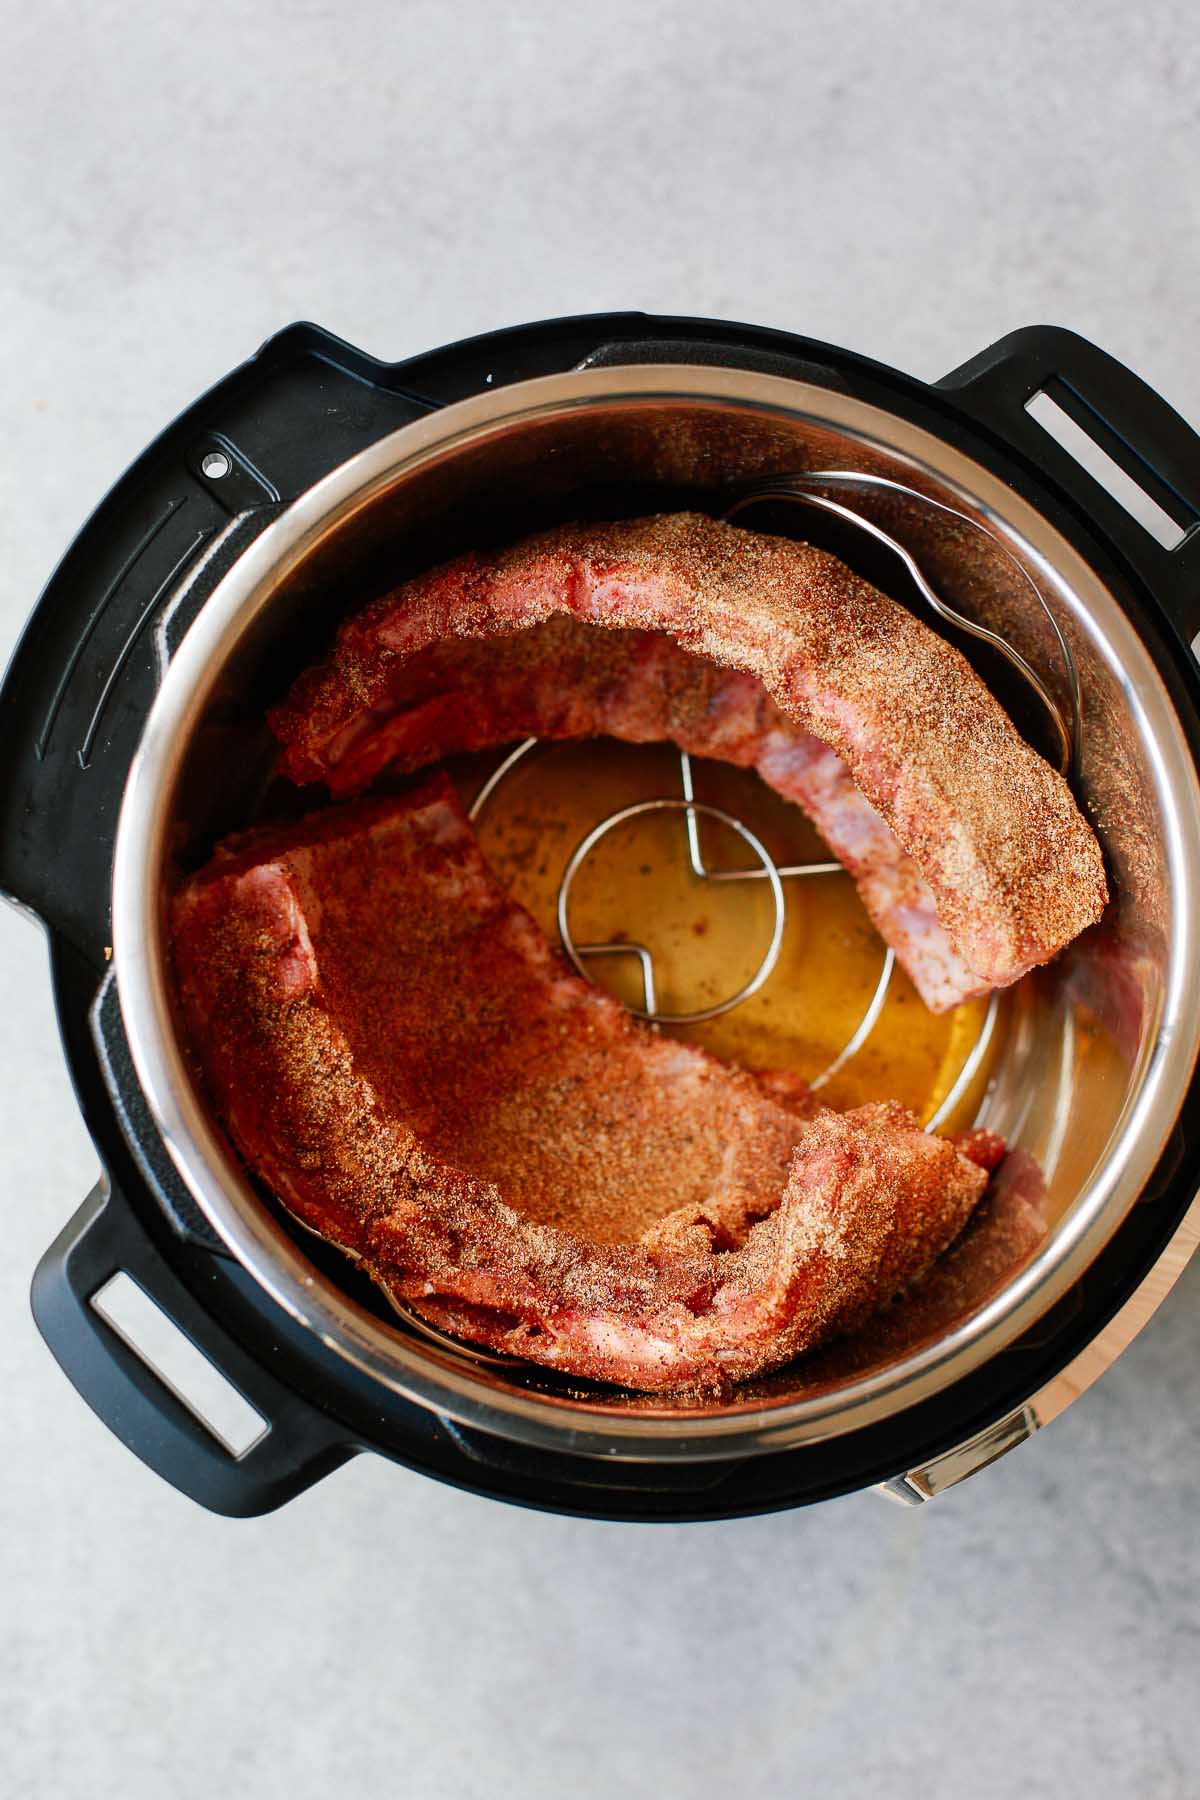 Set of two photos showing ribs inside of the Instant Pot before cooking